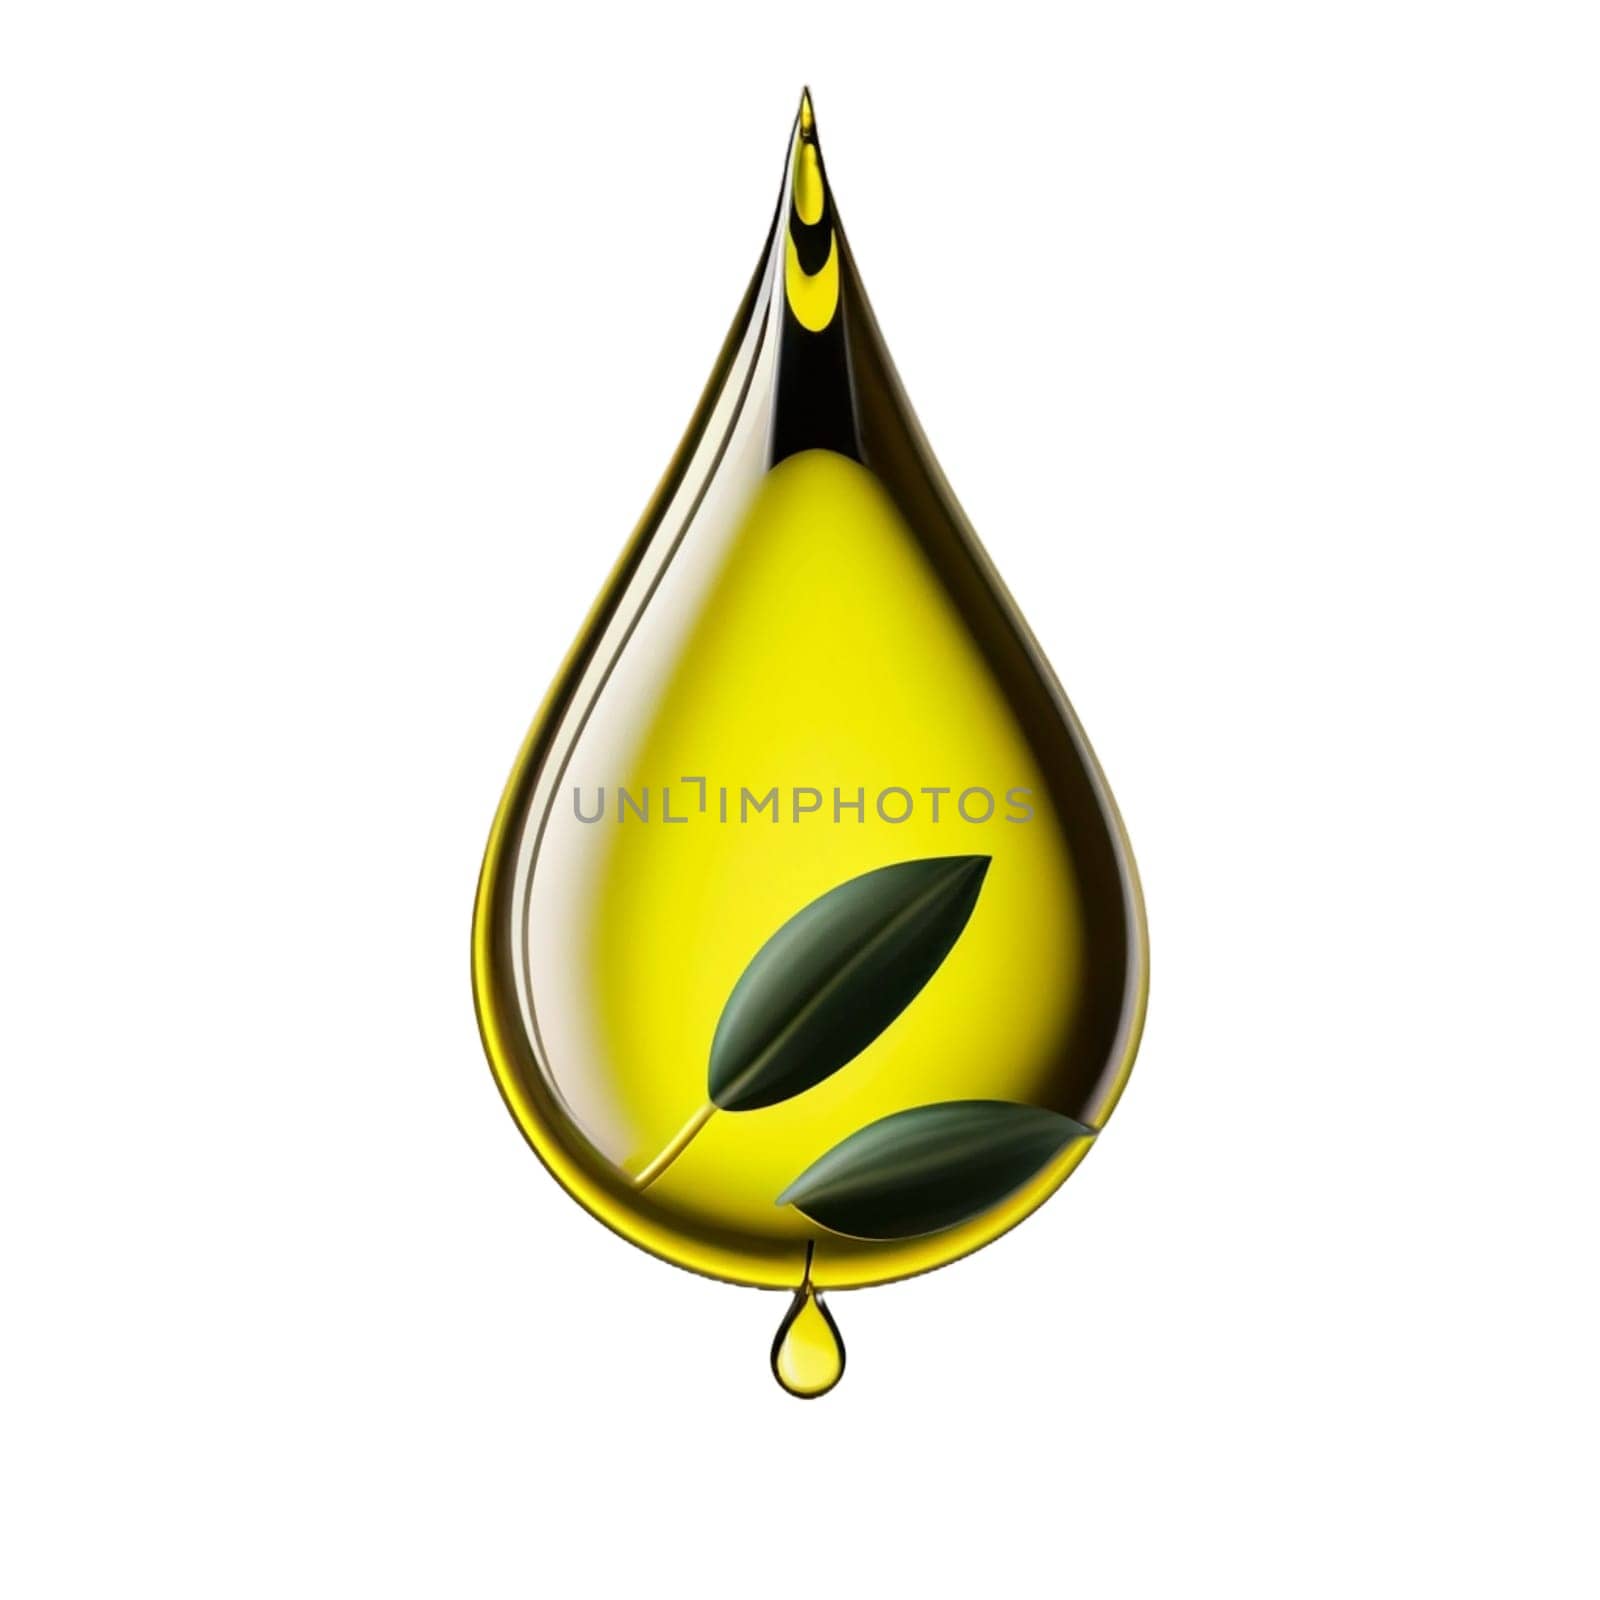 Oil drop isolated on braun background as industrial or petroleum concept. png image. High quality image